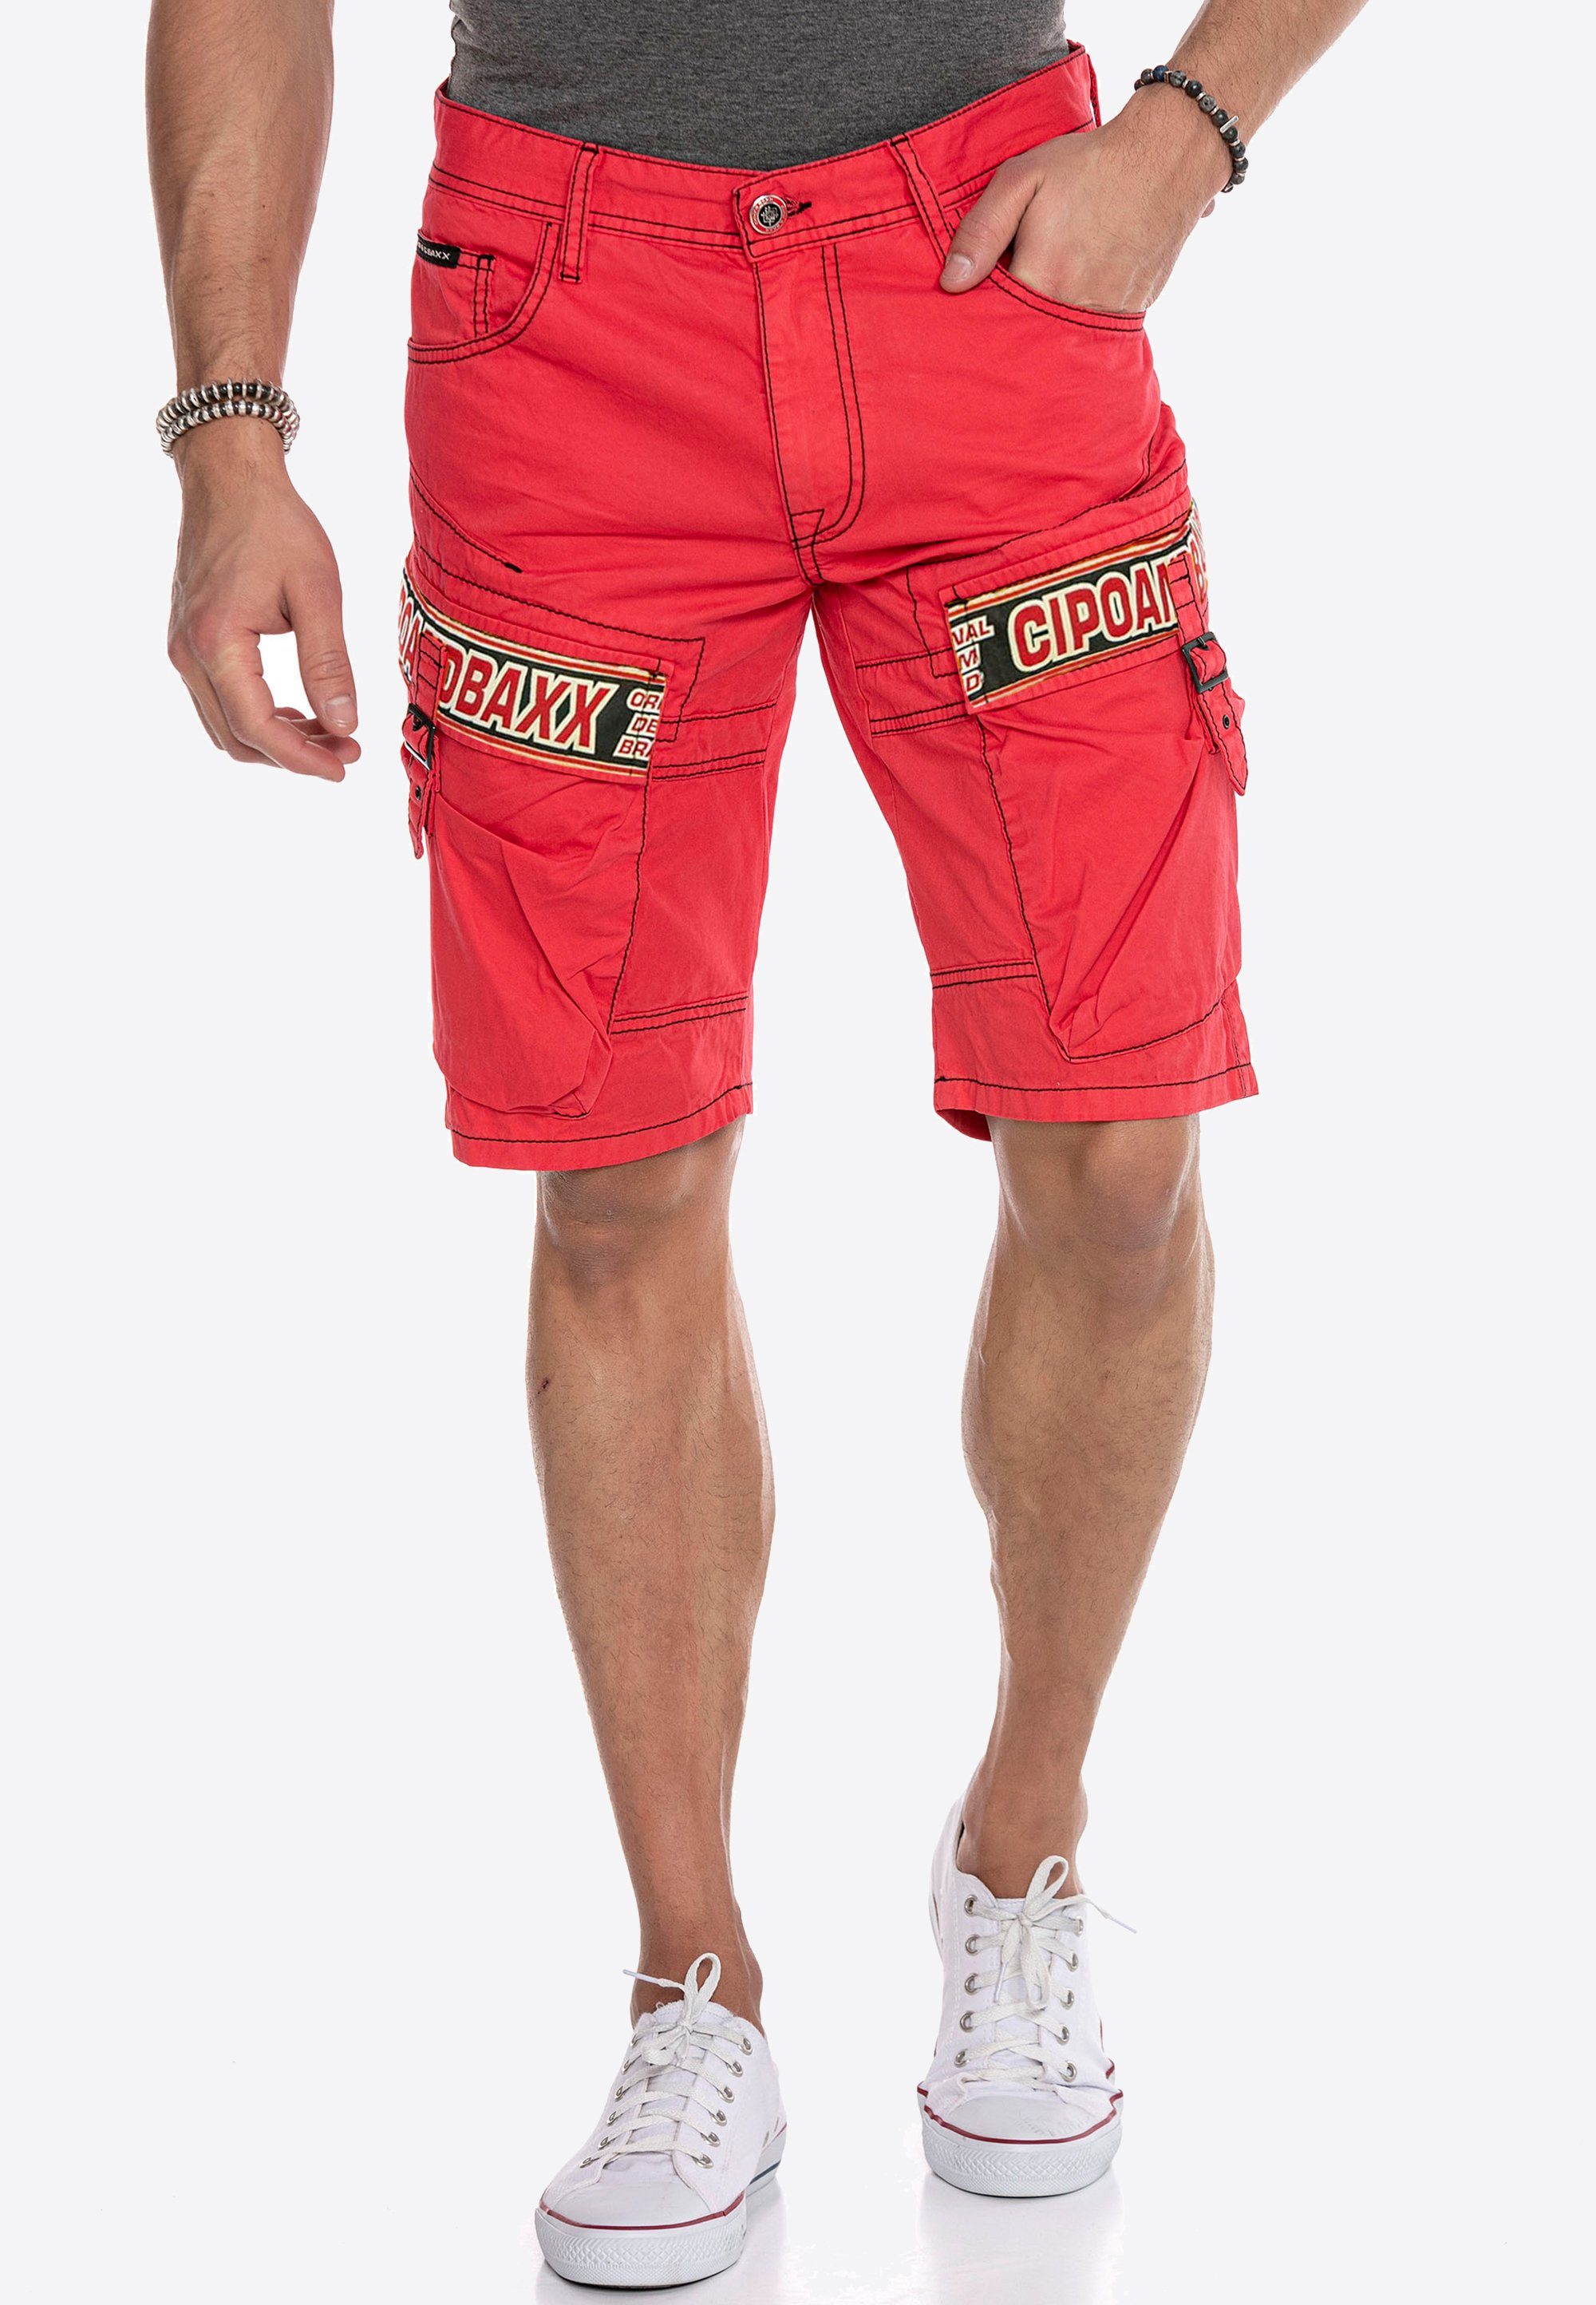 Cipo & Baxx Shorts im Sommer Look rot